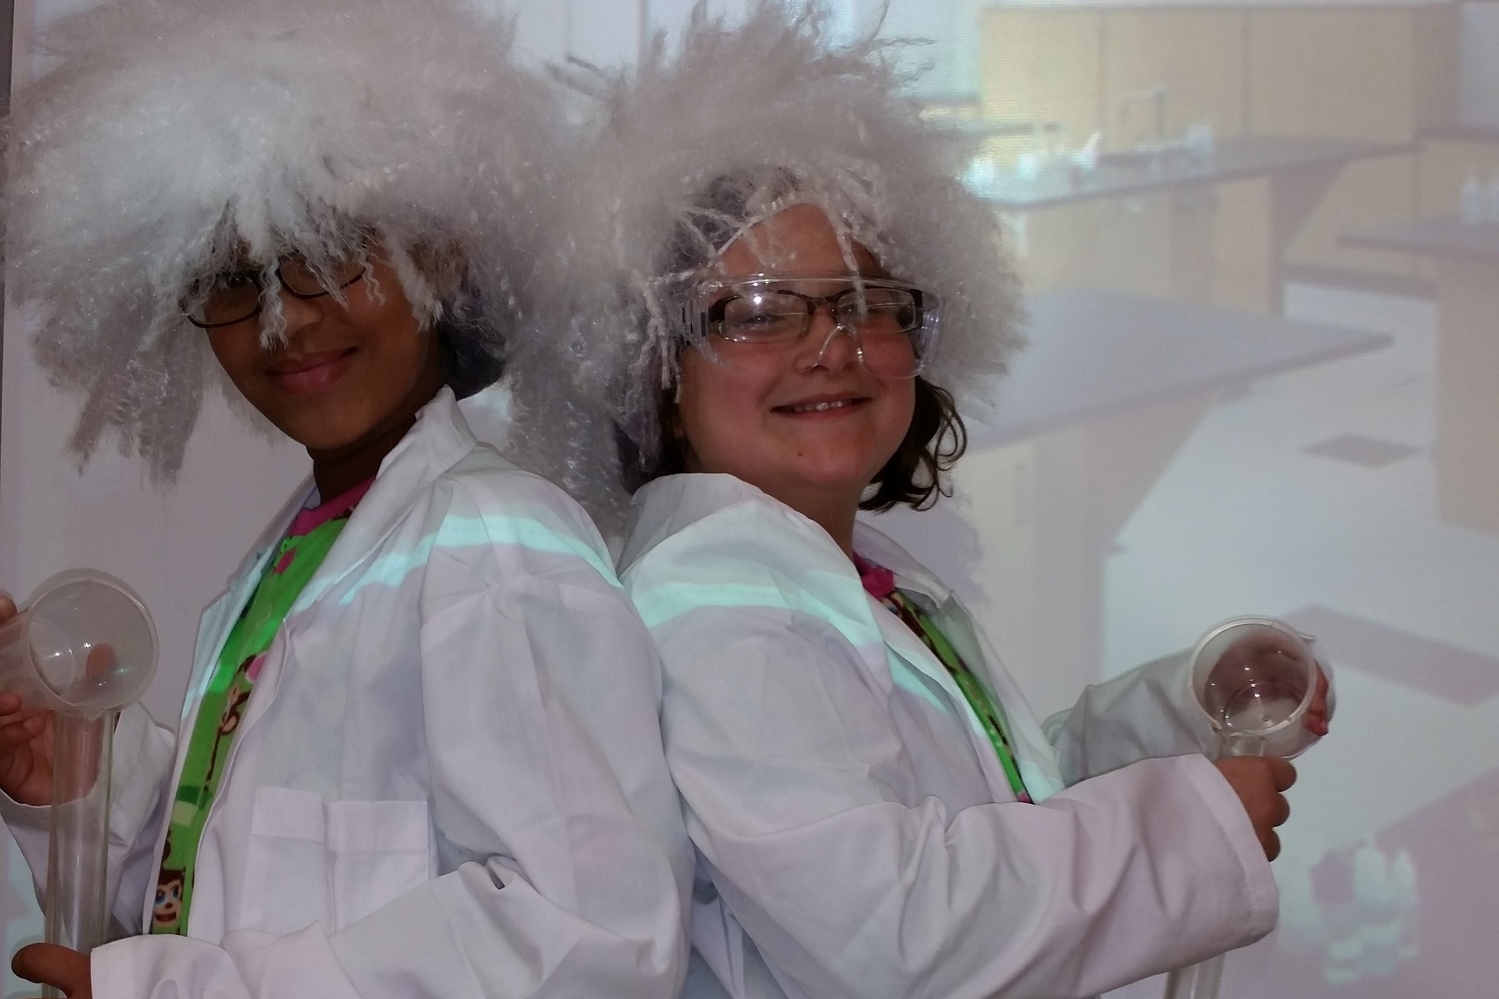 g4g Day@New York 2014 – Launch with "Trick-or-treat for Science"!- More crazy scientists!